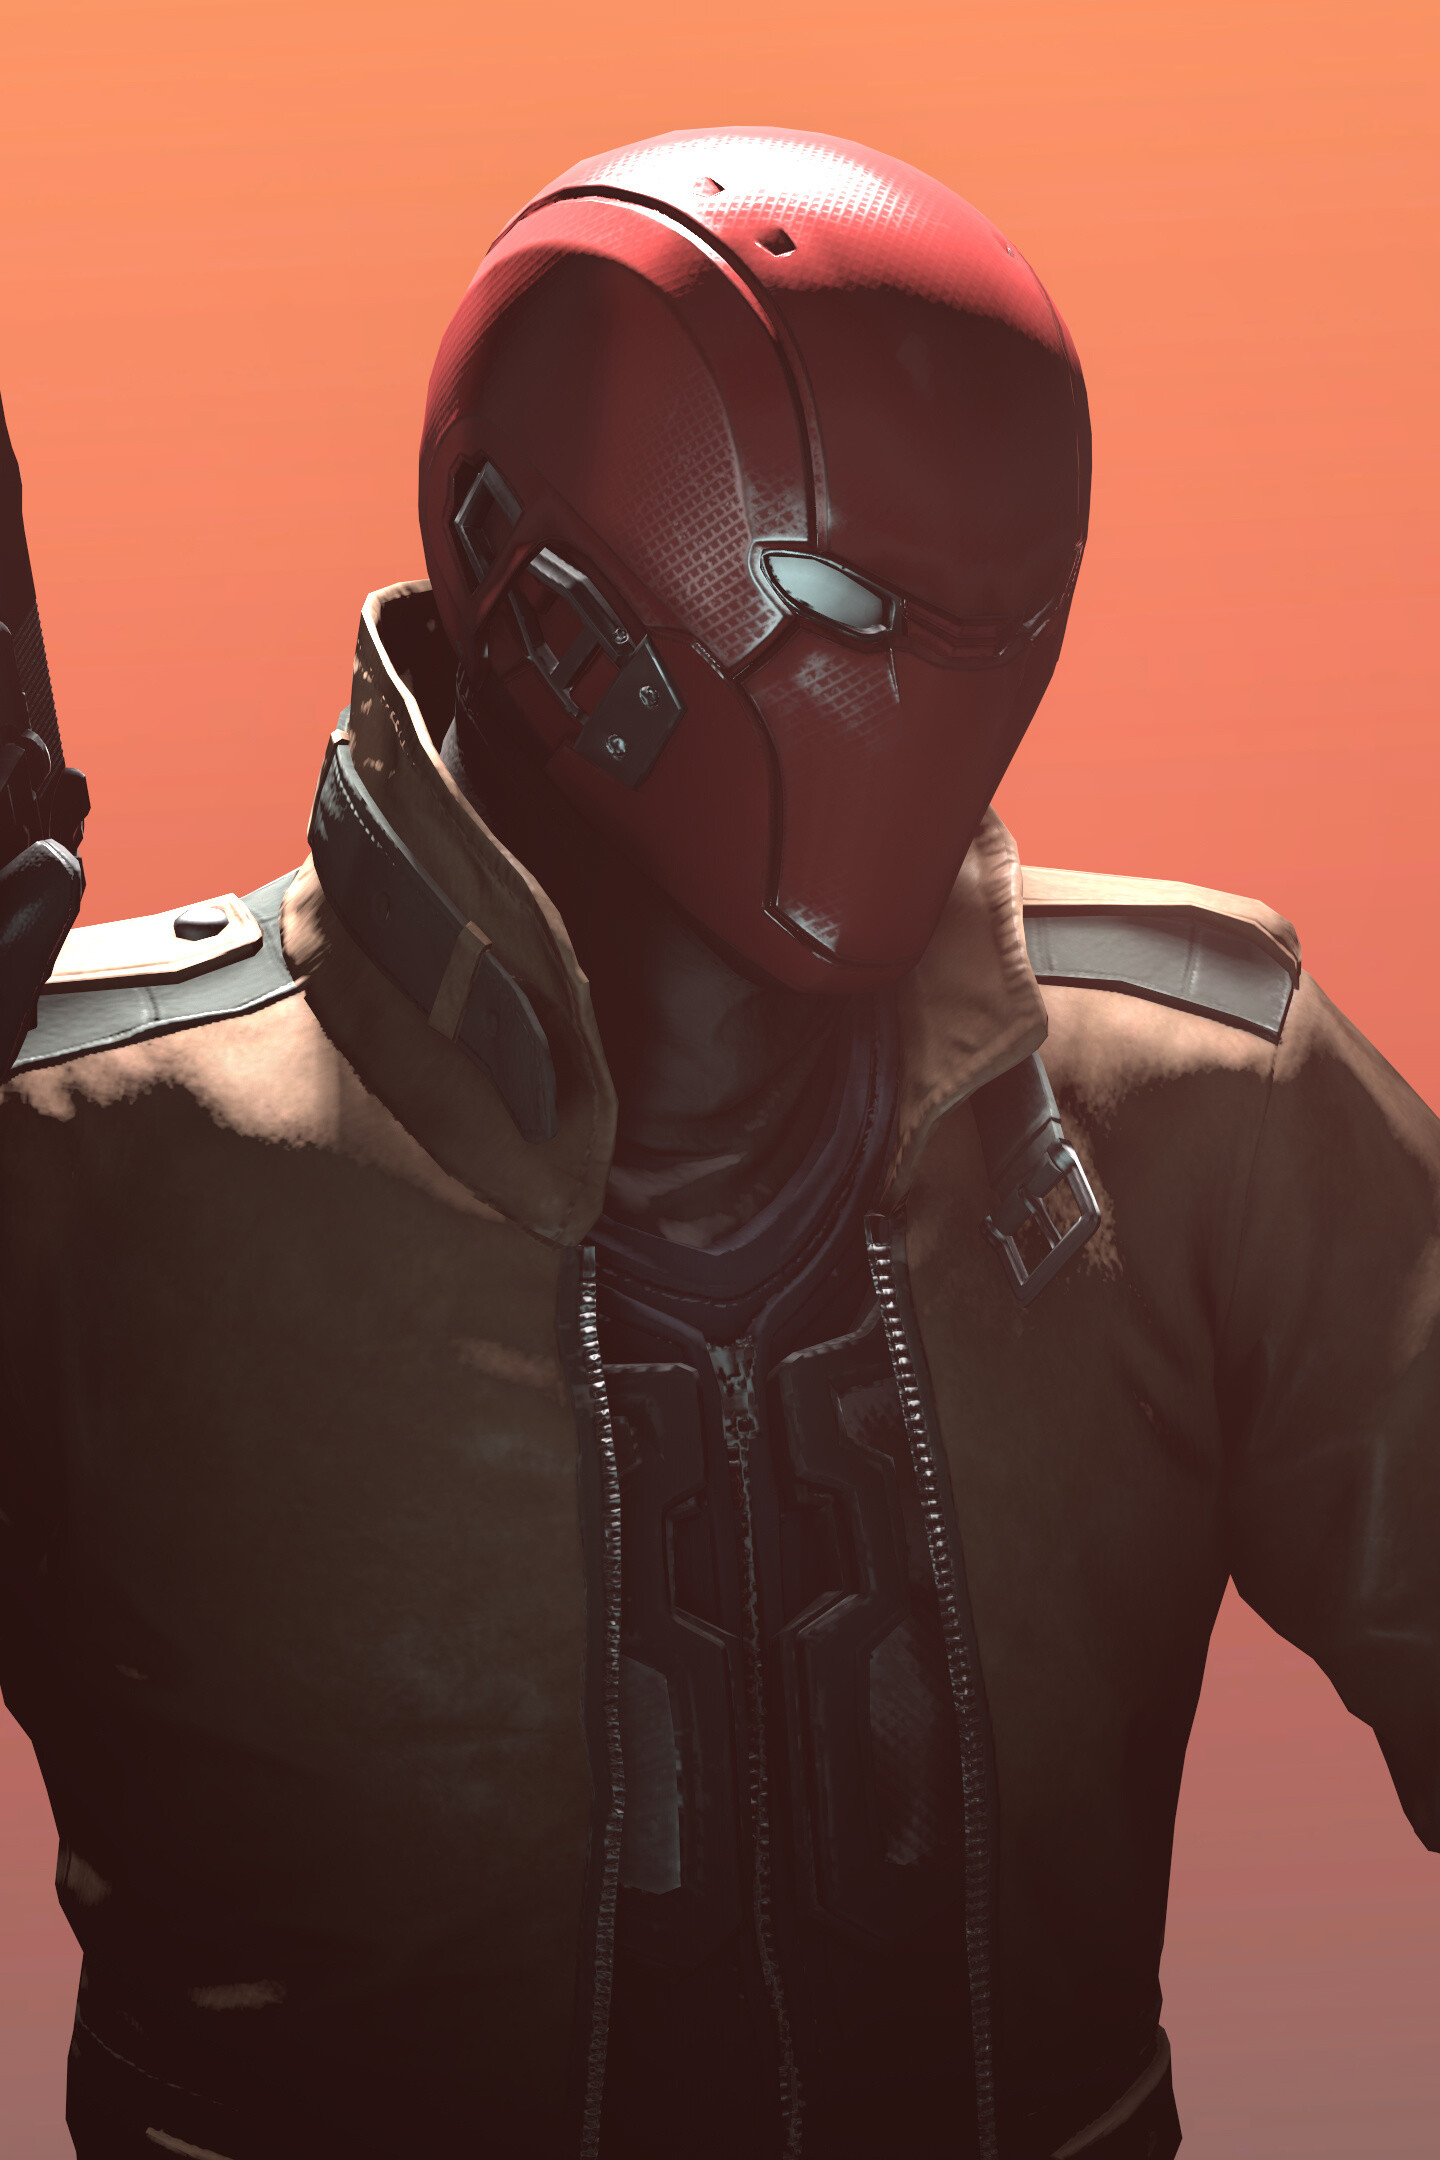 Injustice: Red Hood, A known anti-hero and former partner of Batman, A playable character. 1440x2160 HD Wallpaper.